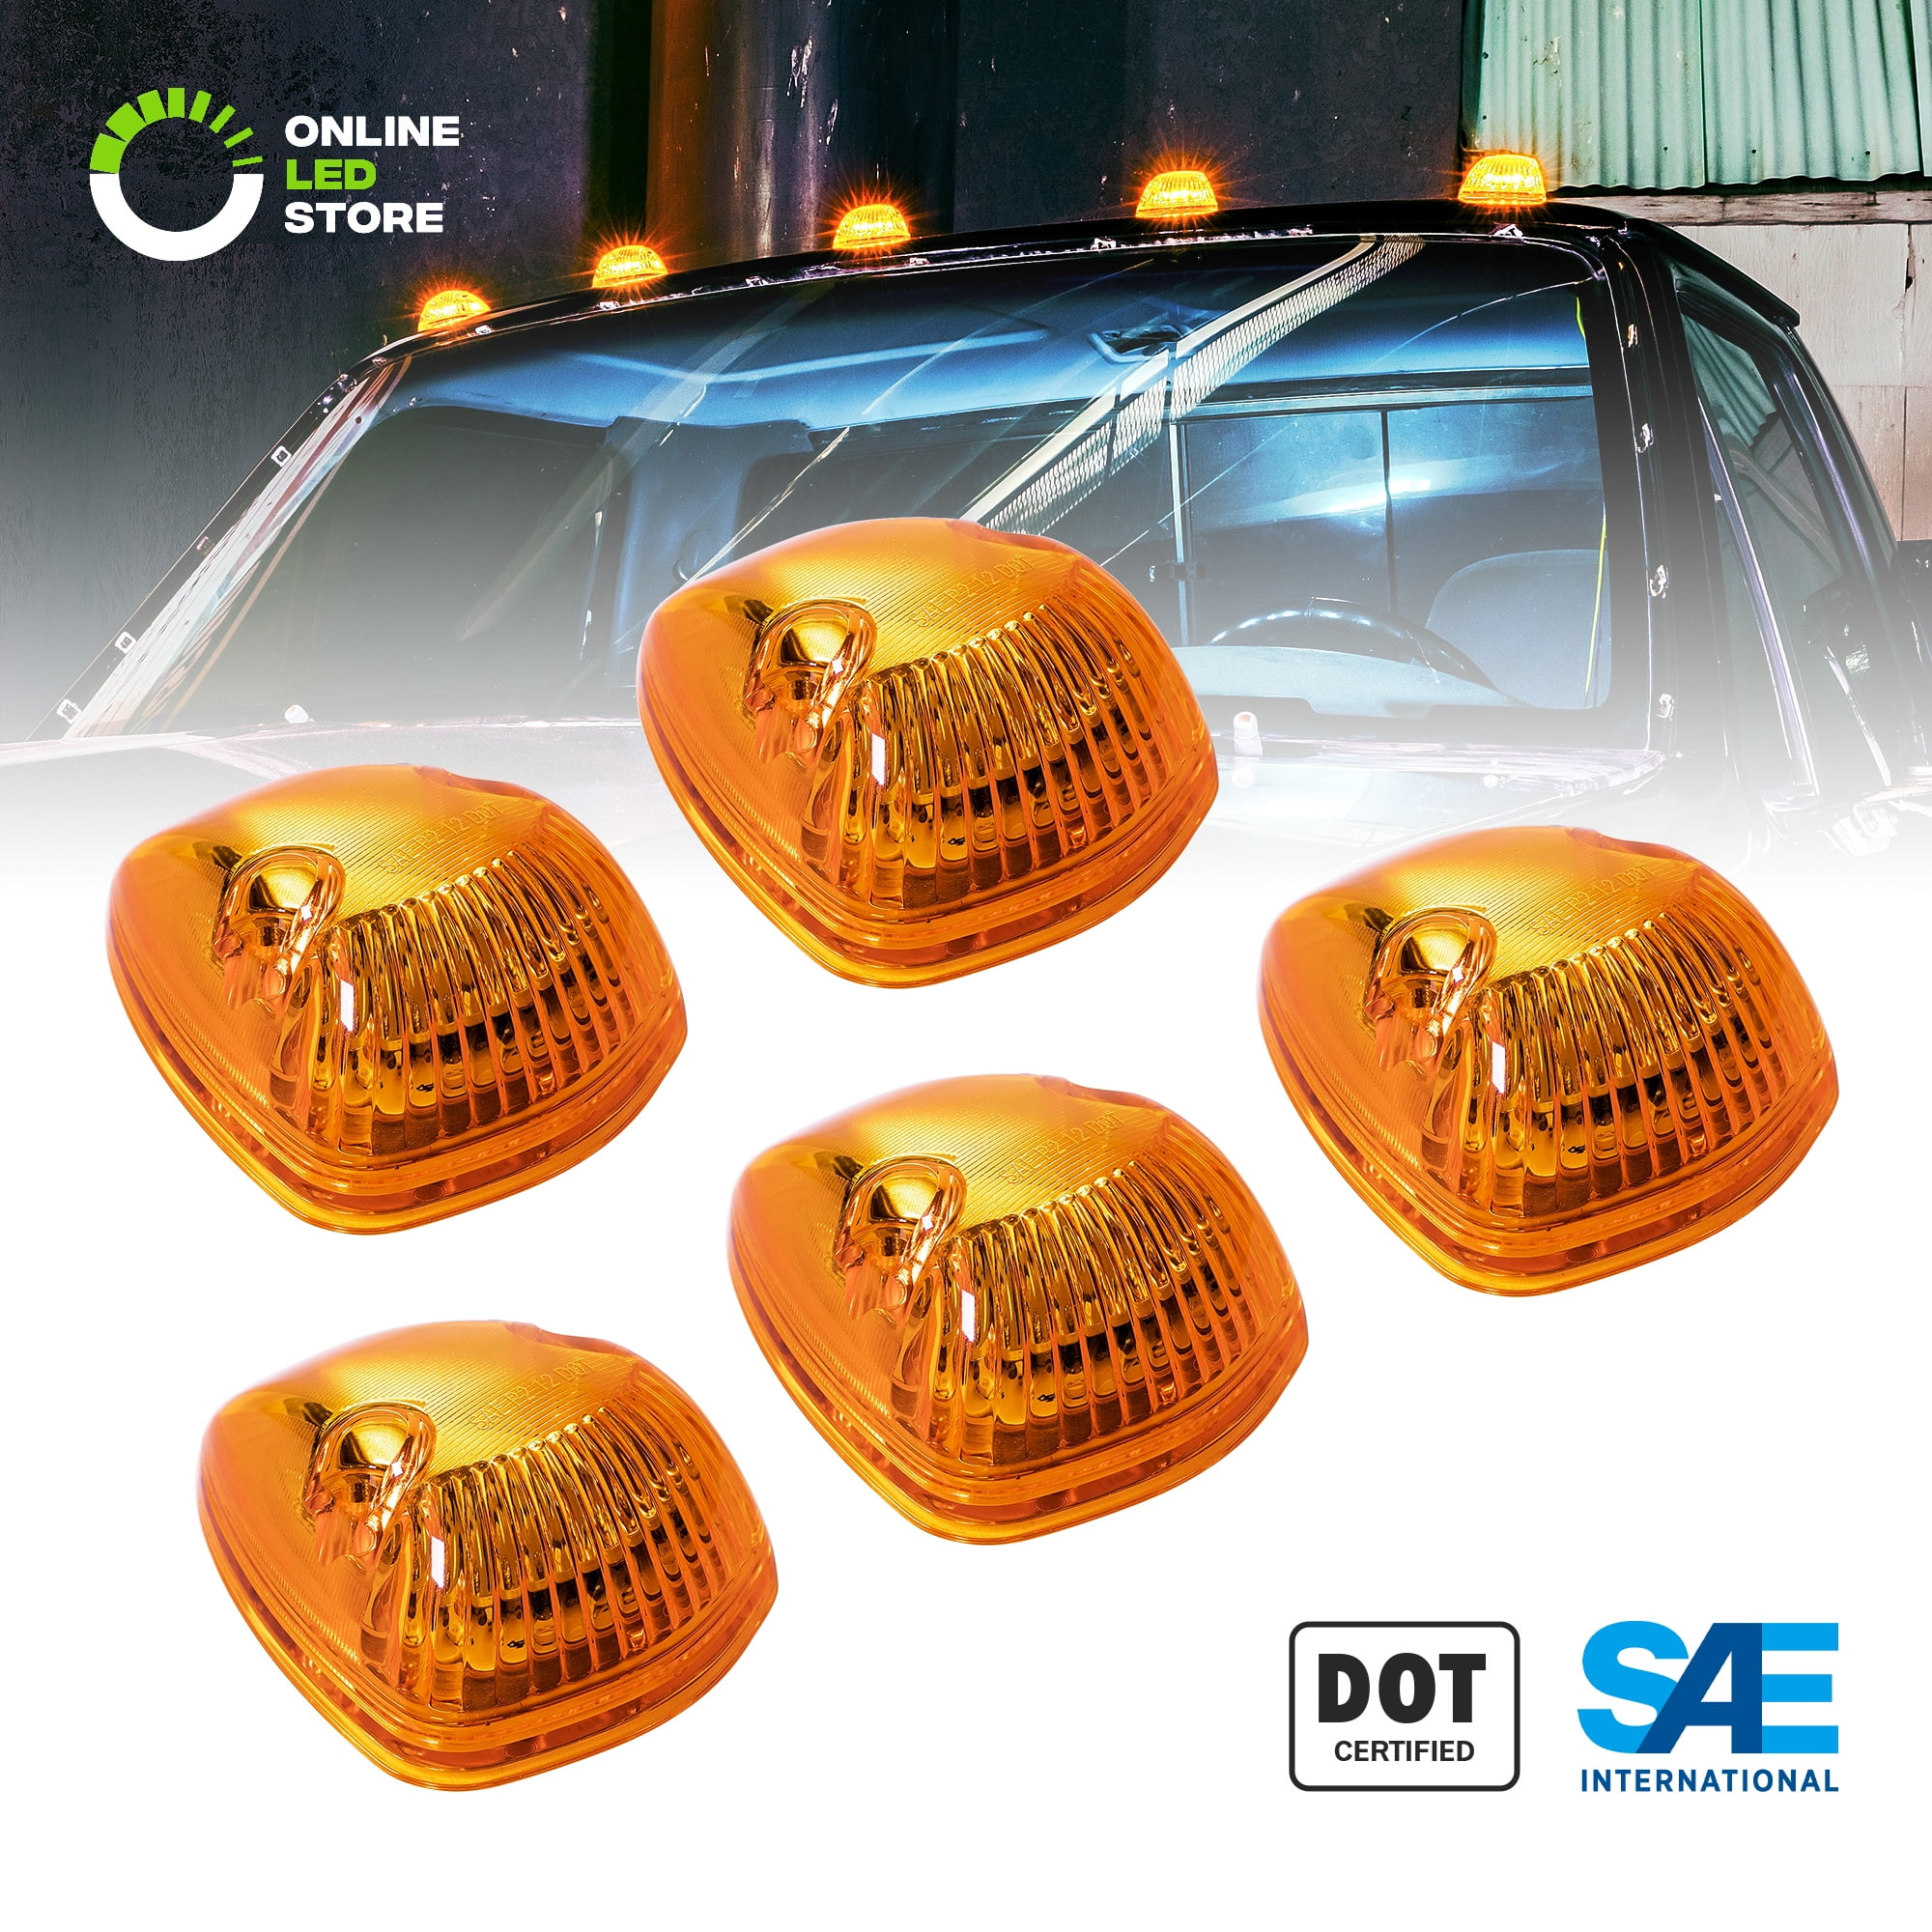 DOT/SAE Certified 12 LED Heavy Duty Universal Fit or Replacement for 94-98 Dodge Ram LED Roof Top Marker Running Lights - 1pc Amber LED Cab Lights Waterproof 